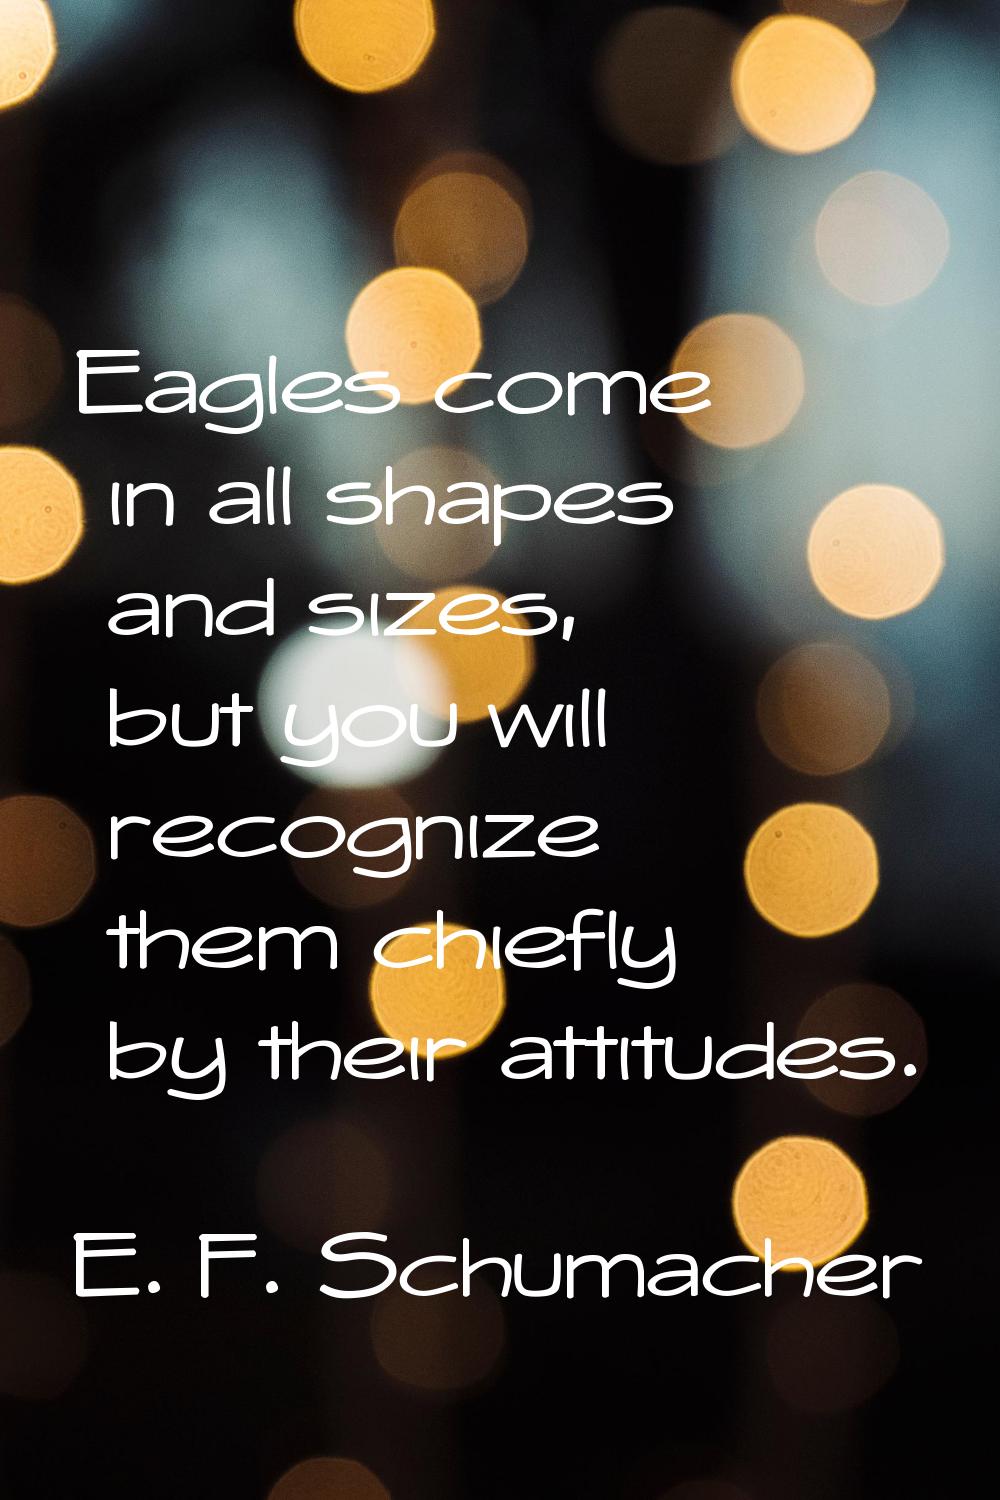 Eagles come in all shapes and sizes, but you will recognize them chiefly by their attitudes.